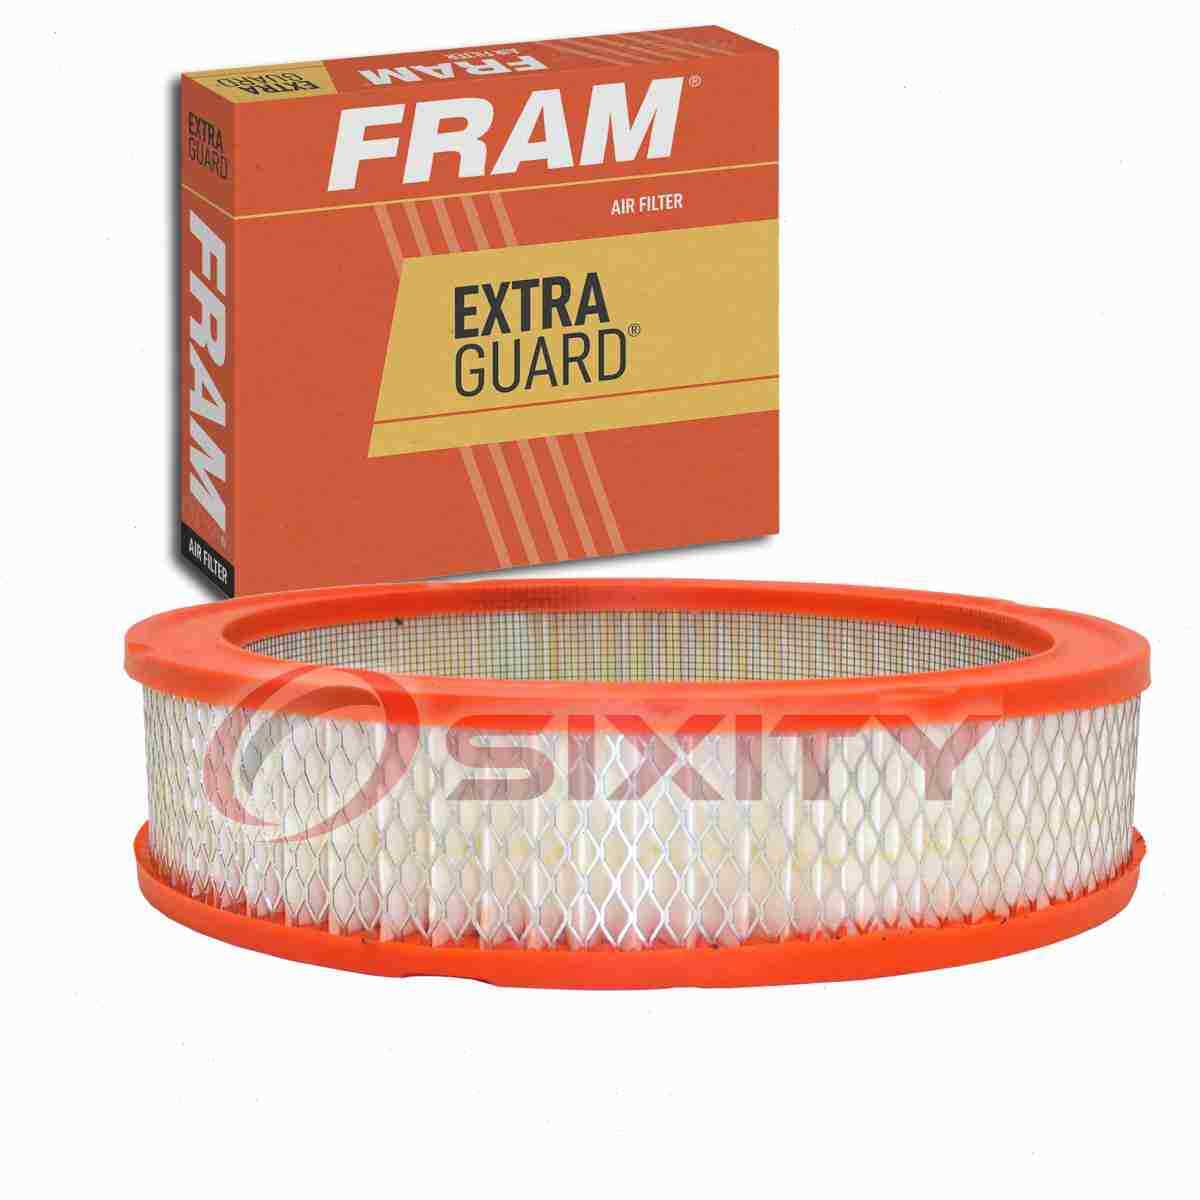 FRAM Extra Guard Air Filter for 1974-1987 Jeep J10 Intake Inlet Manifold us